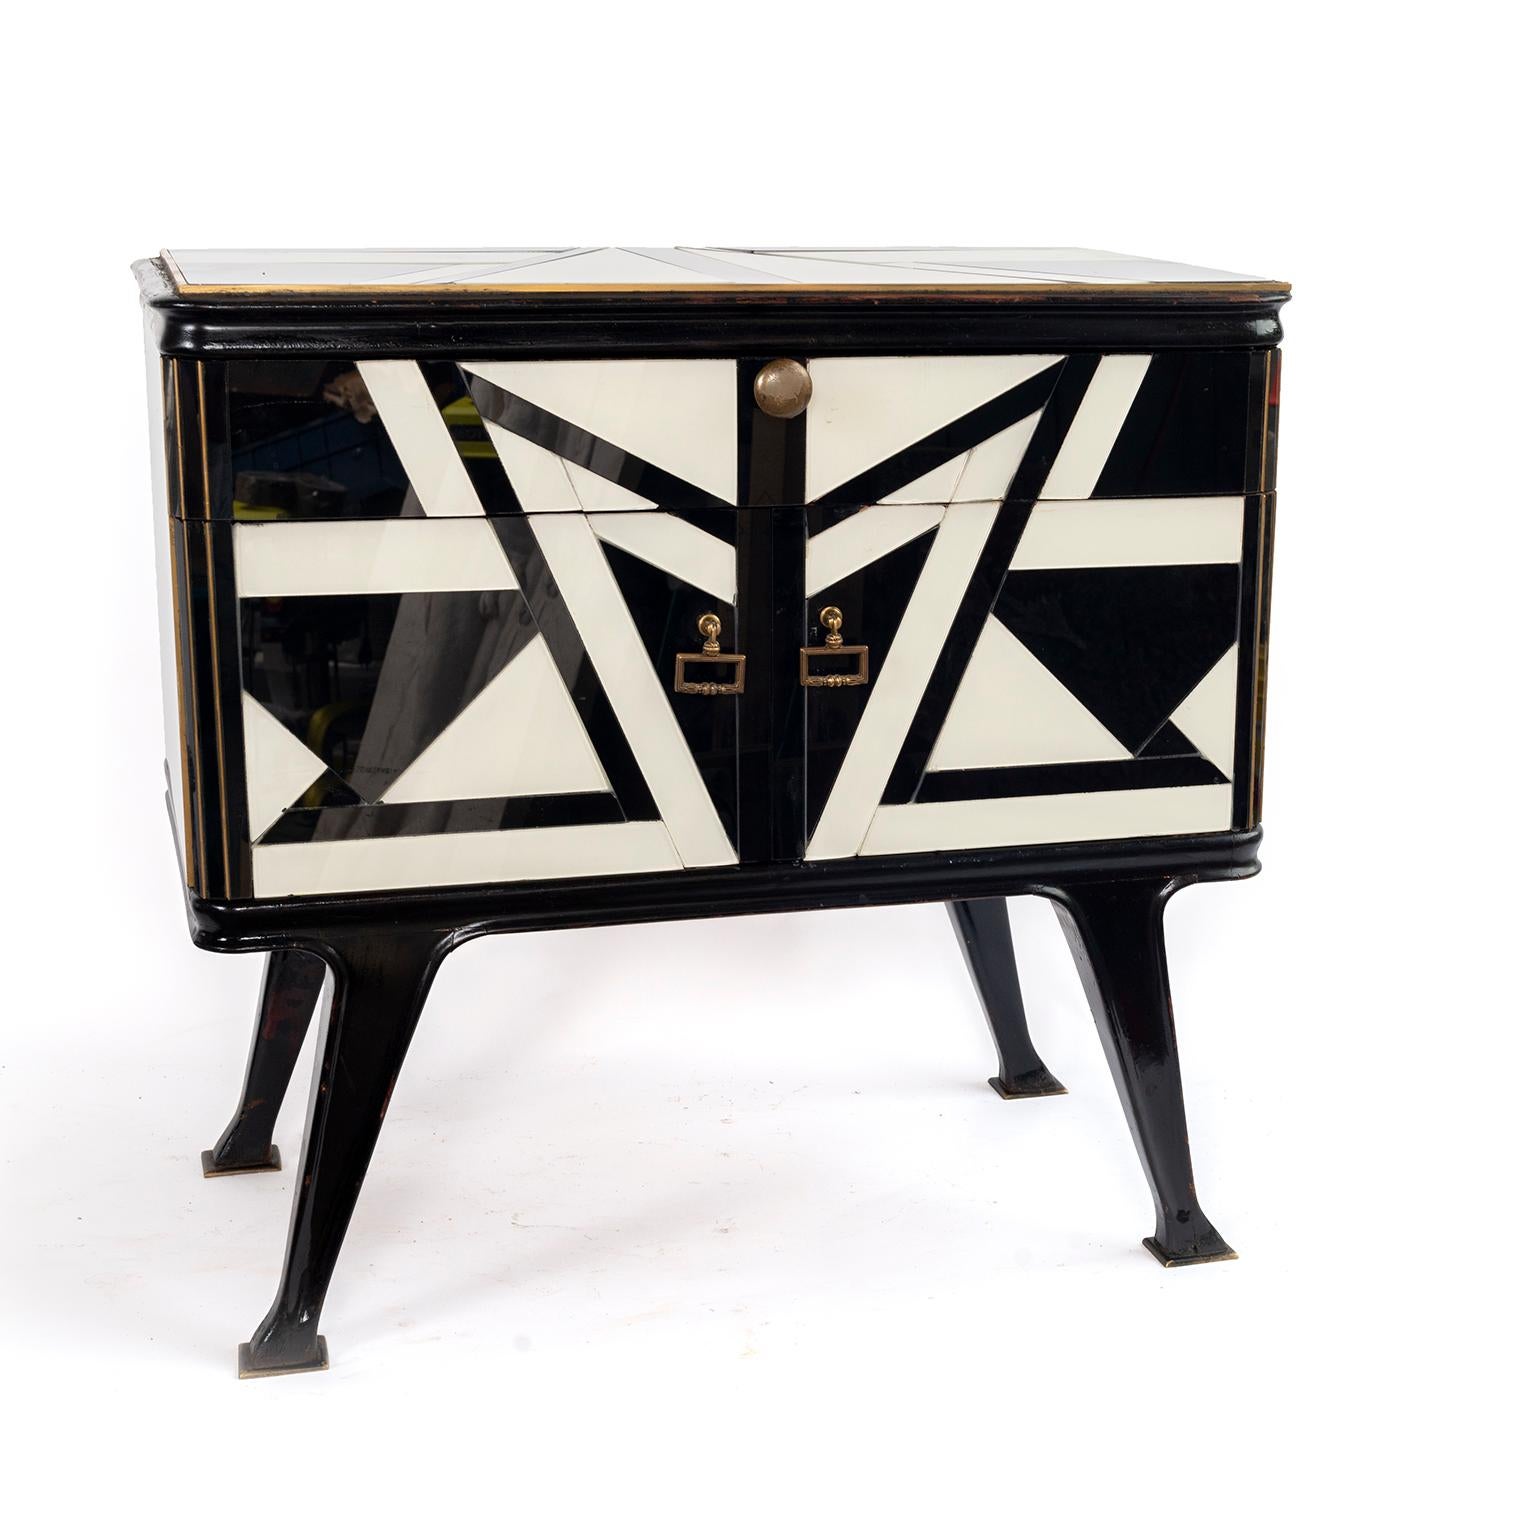 A pair of black and white, opaline and wood site tables or nightstands with a top drawer and a cabinet below. Would look good in the living room or bedroom!